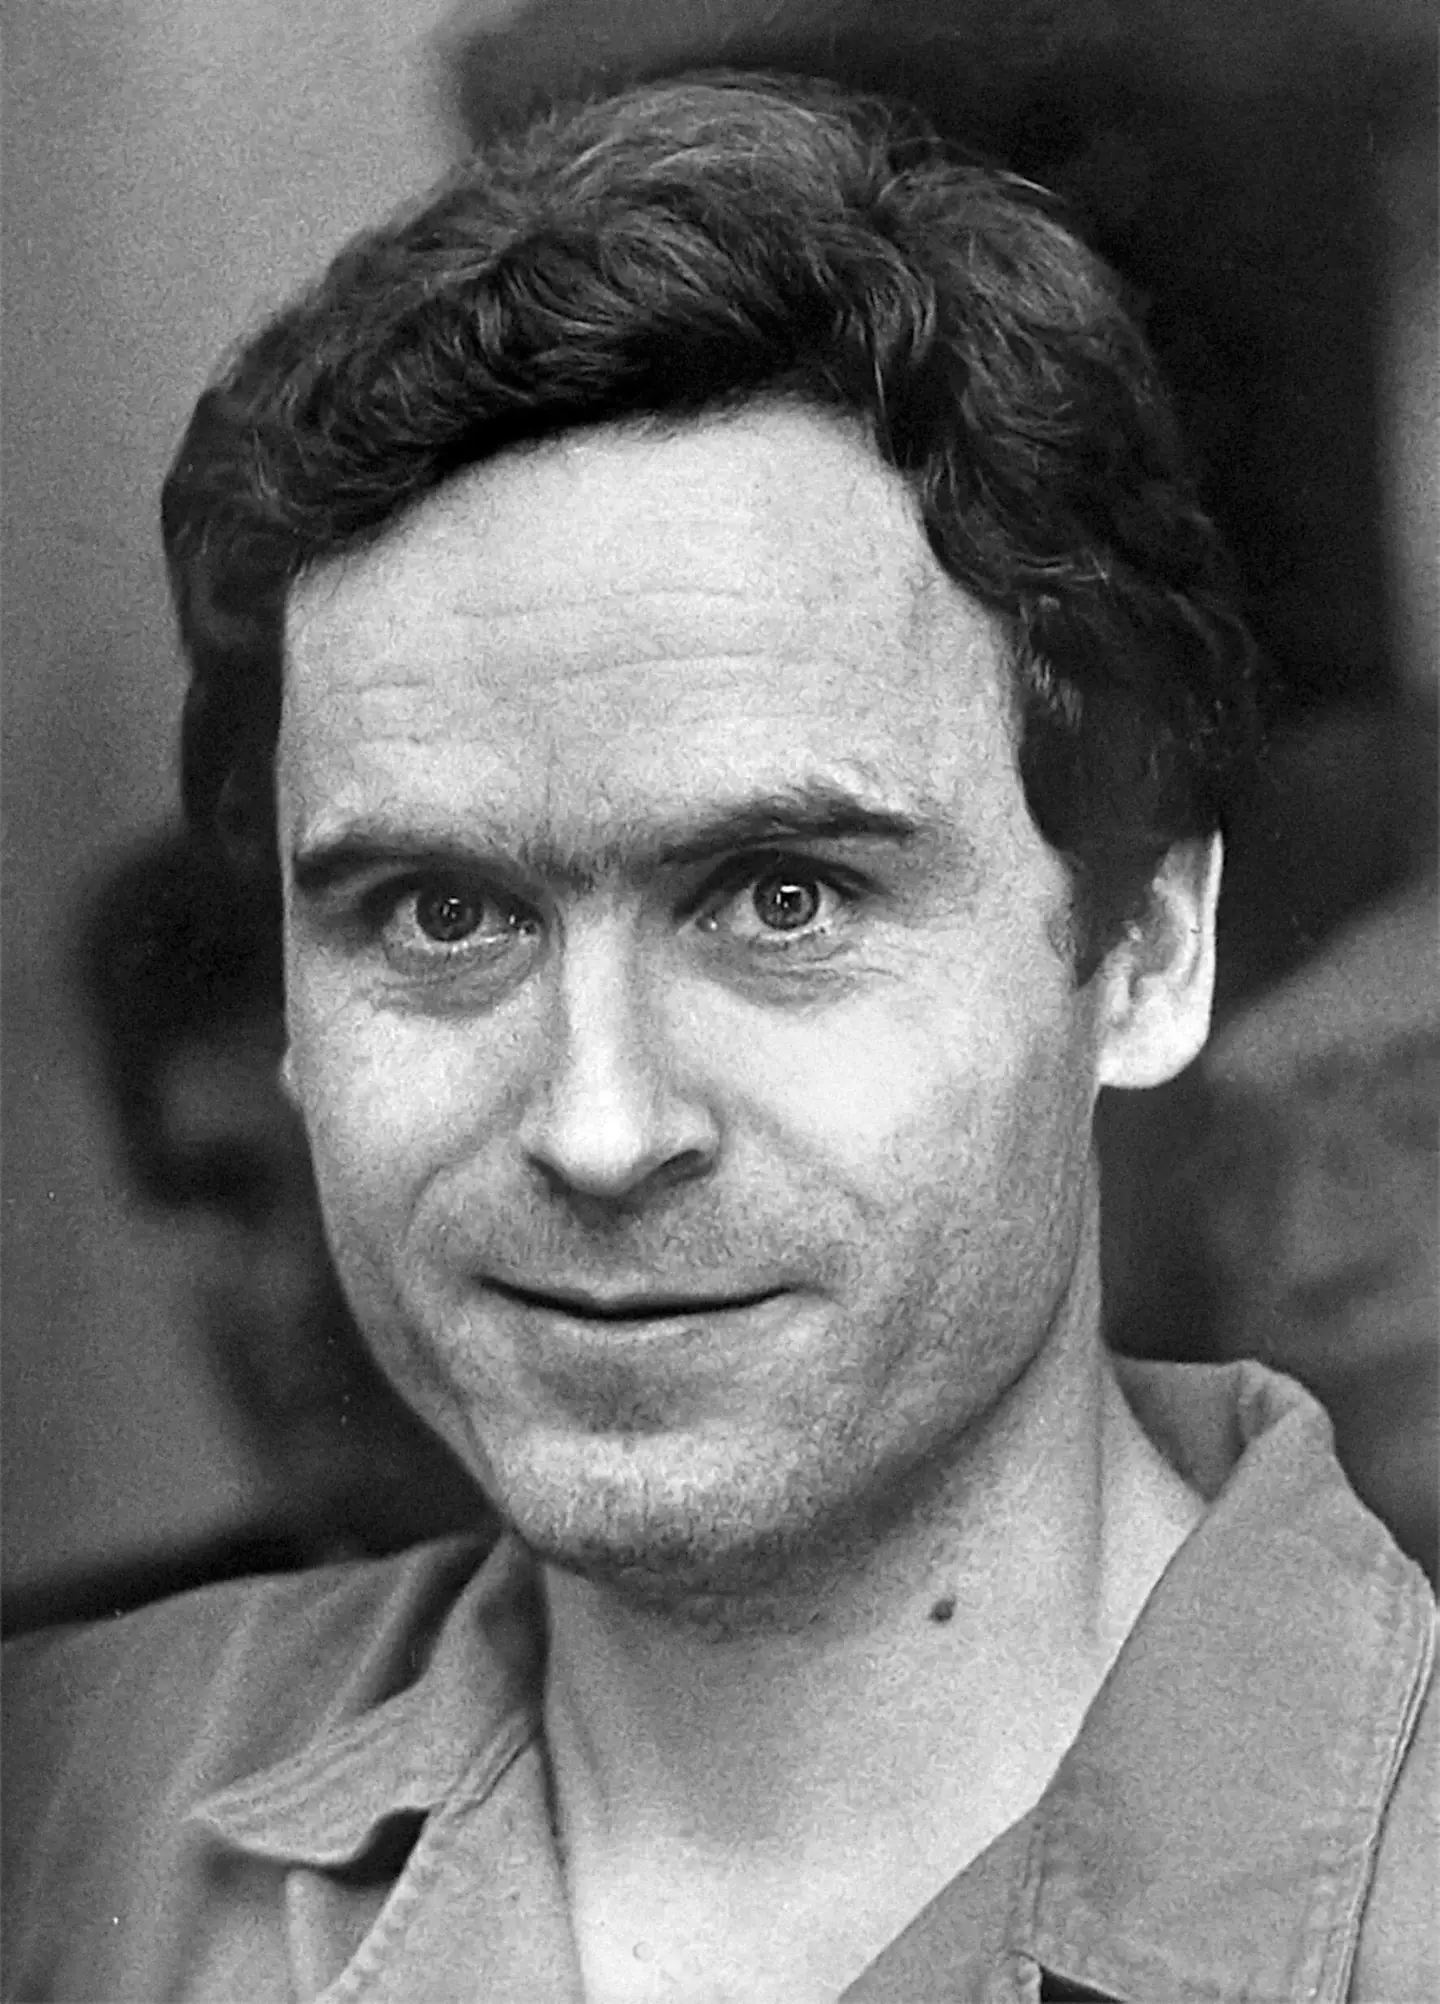 Ted Bundy was once a suspect in the case.